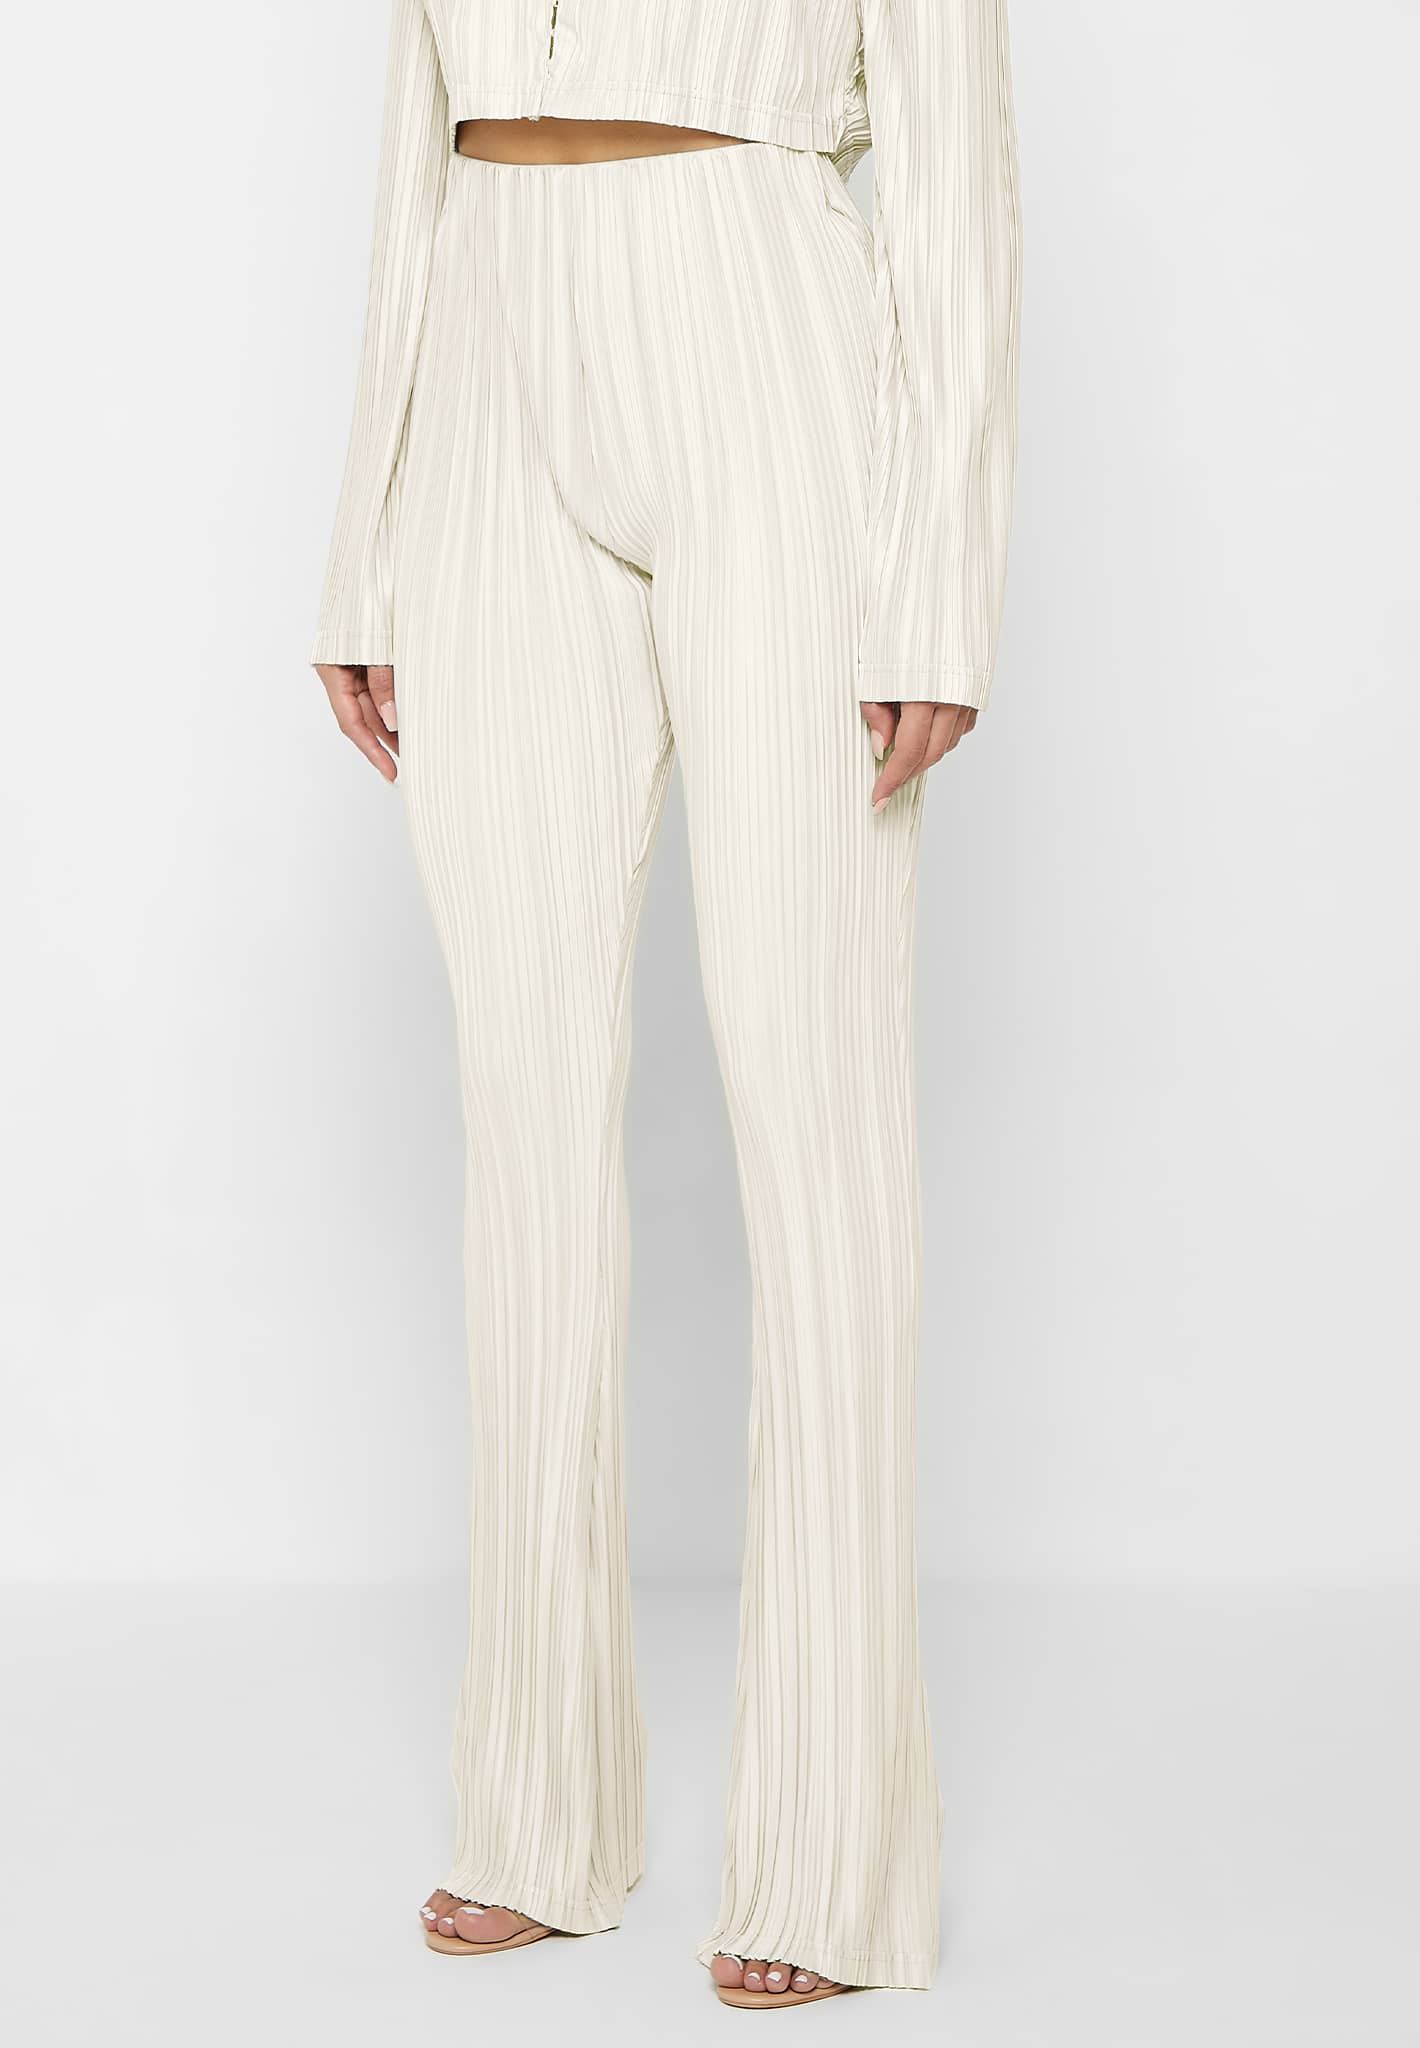 Buy Online Women White Trousers at best price  Plussin